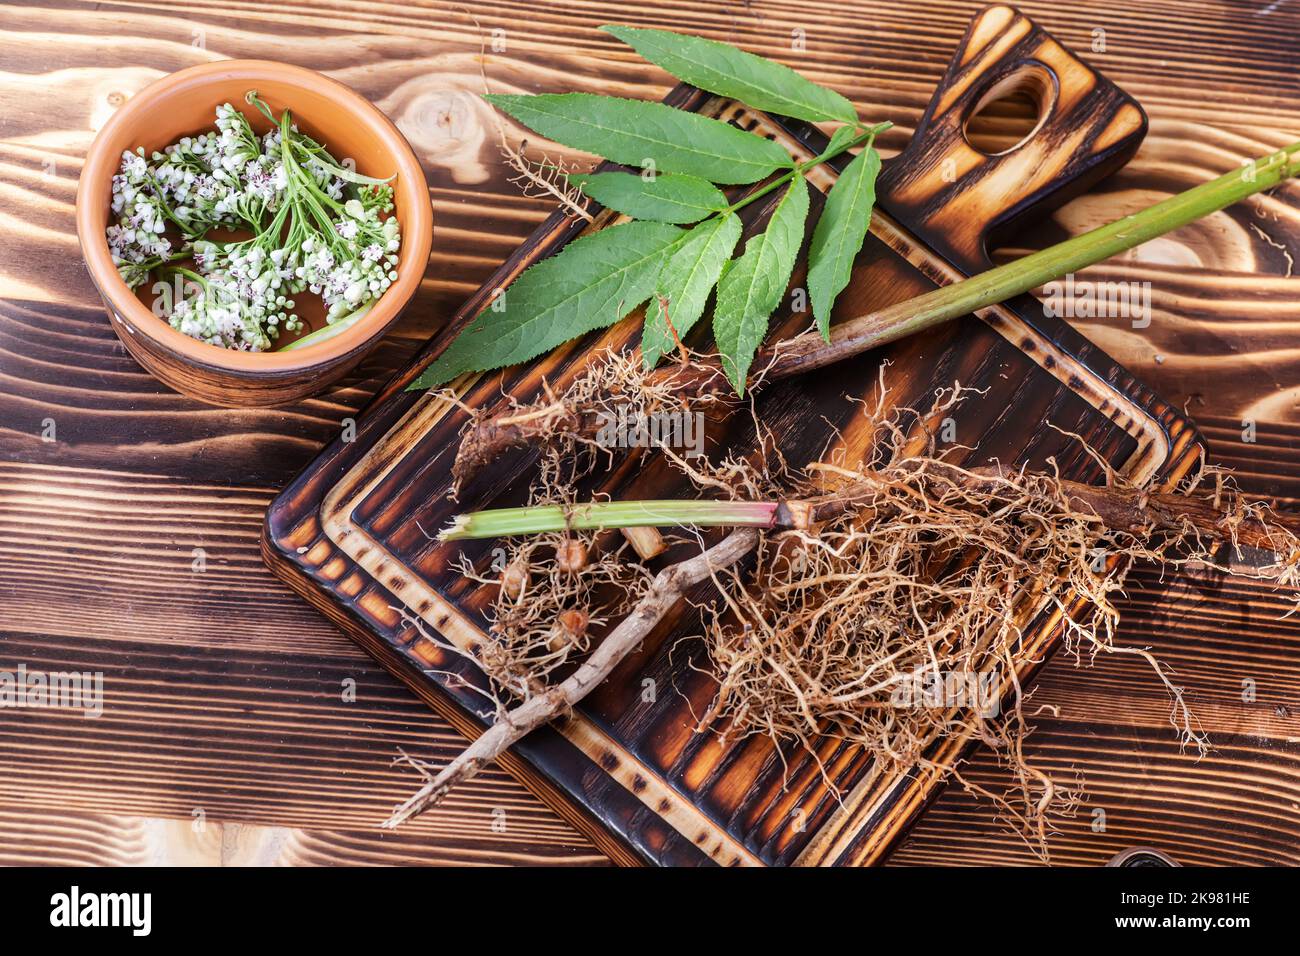 Valeriana roots, leaves and flowers. Collection and harvesting of plant parts for use in traditional and alternative medicine as a sedative and tranqu Stock Photo